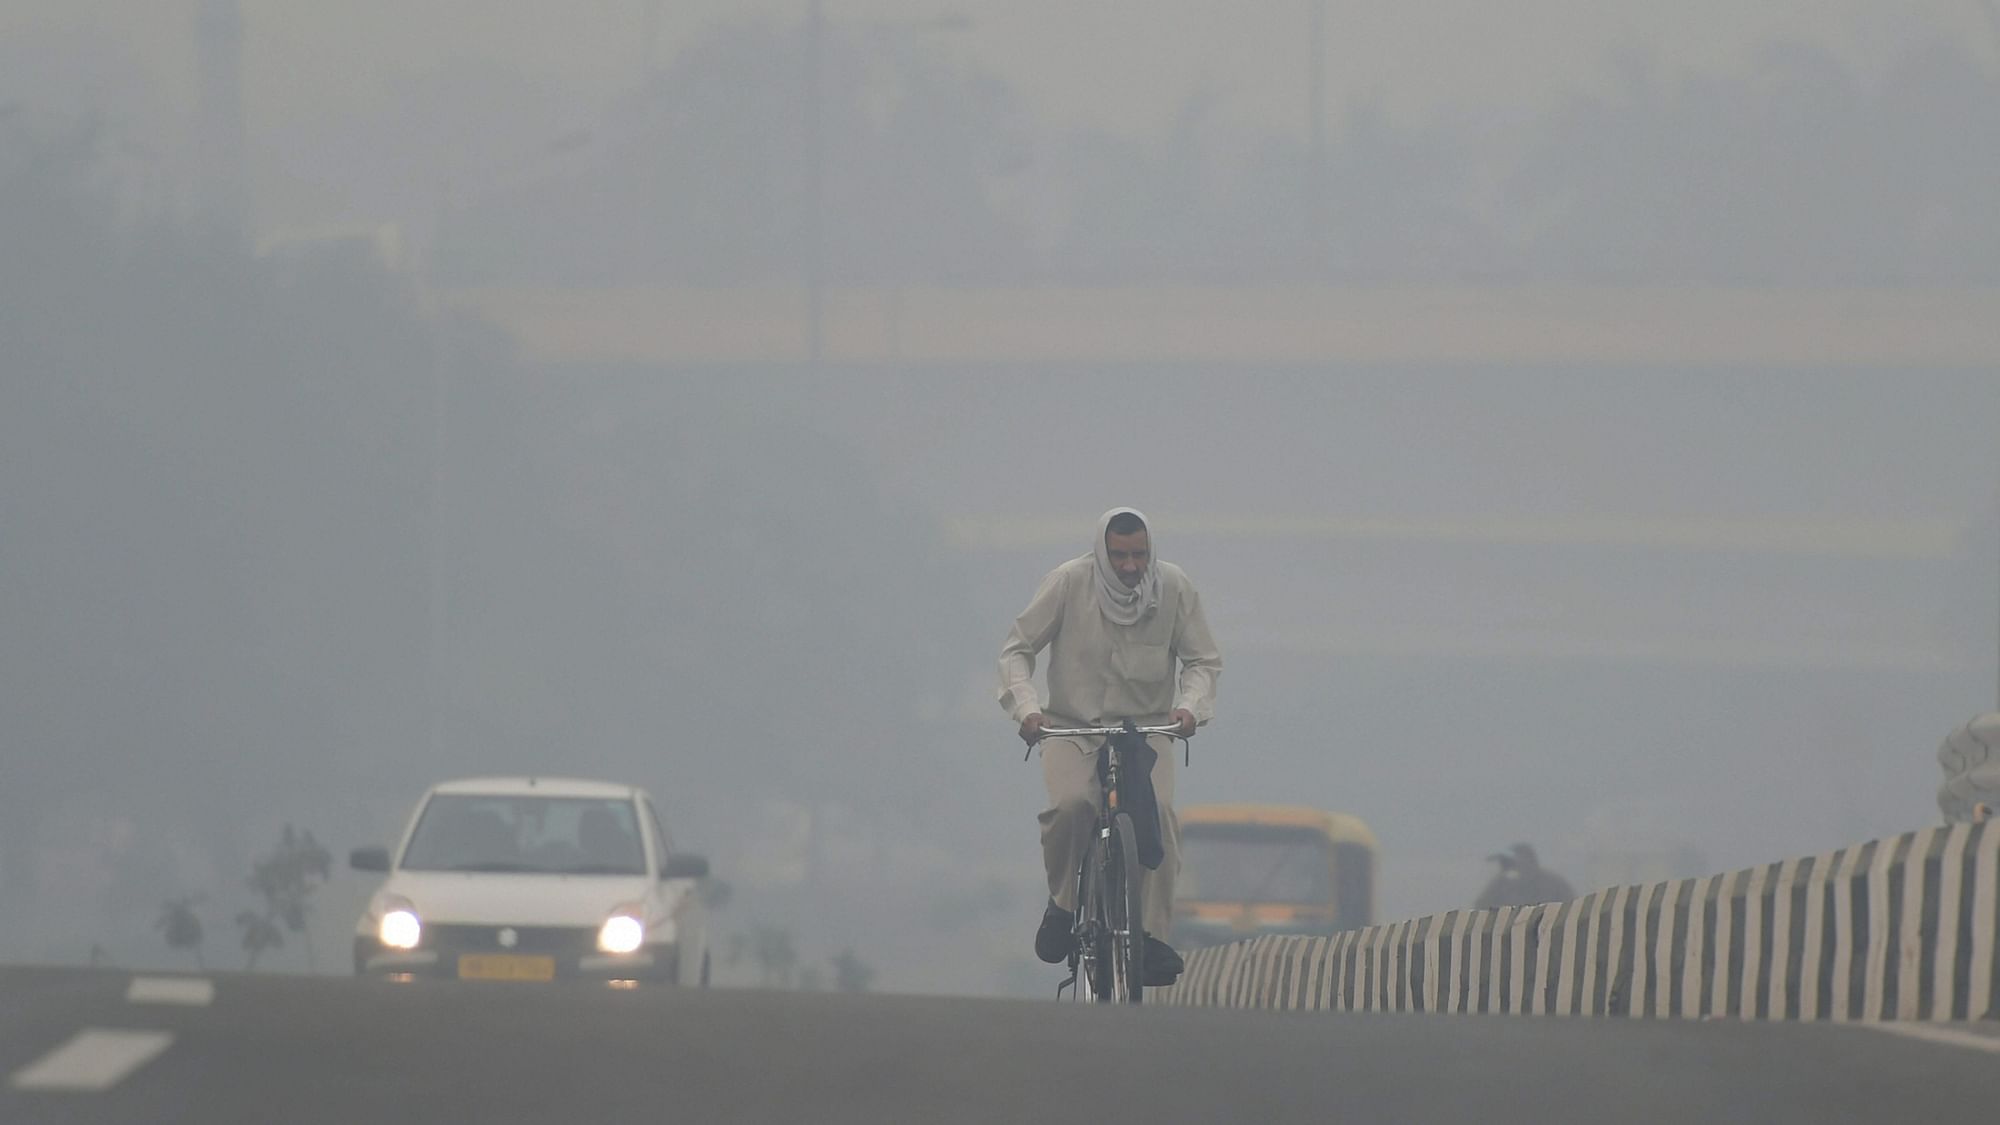 Delhi’s pollution levels rose sharply post Diwali as most of the city was blanketed by a thick layer of smog.